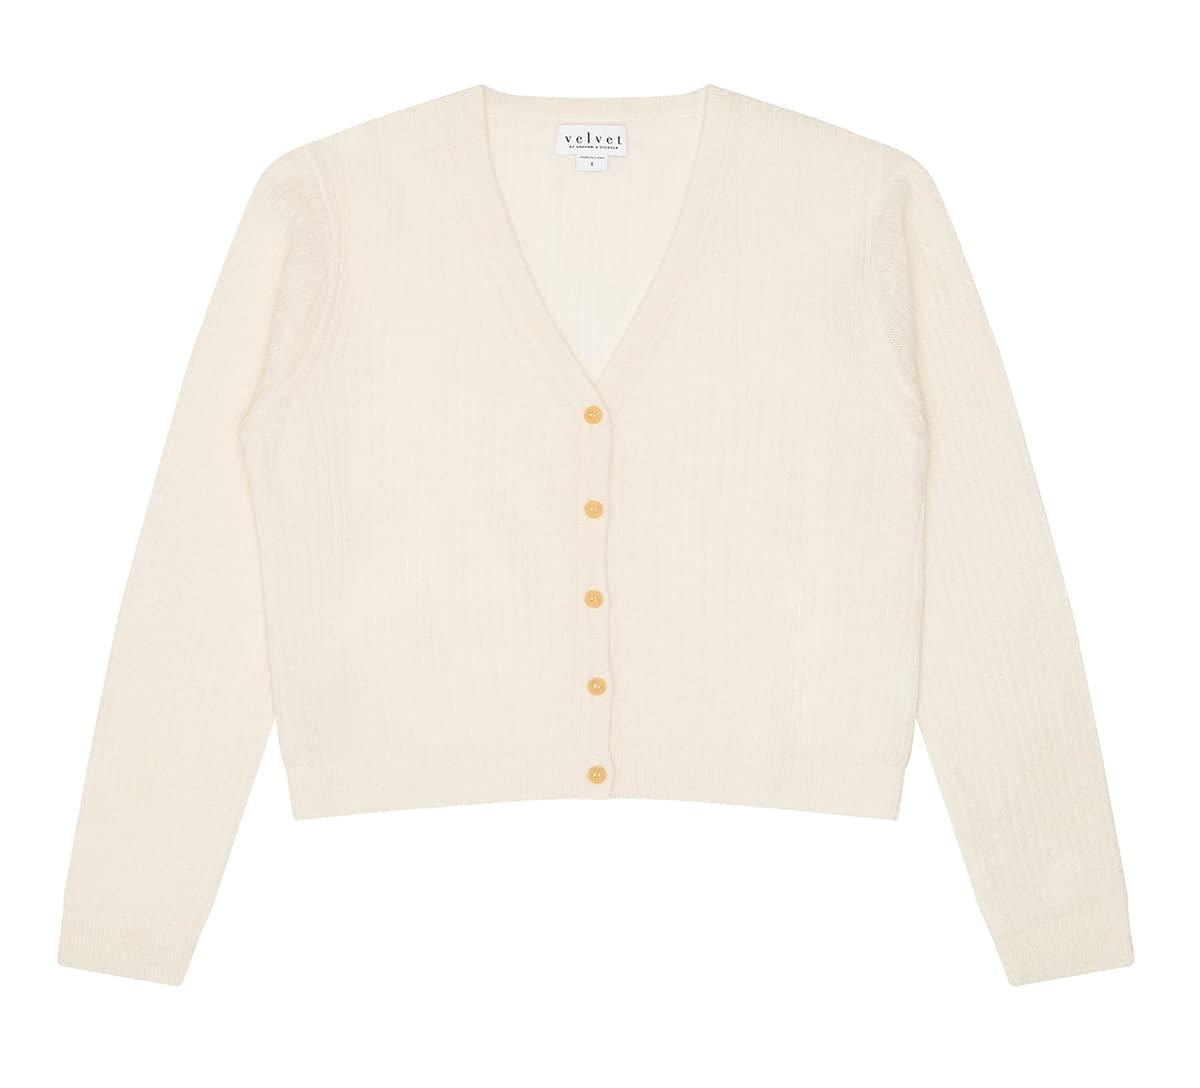 Featuring the Coralie Cashmere Cardigan